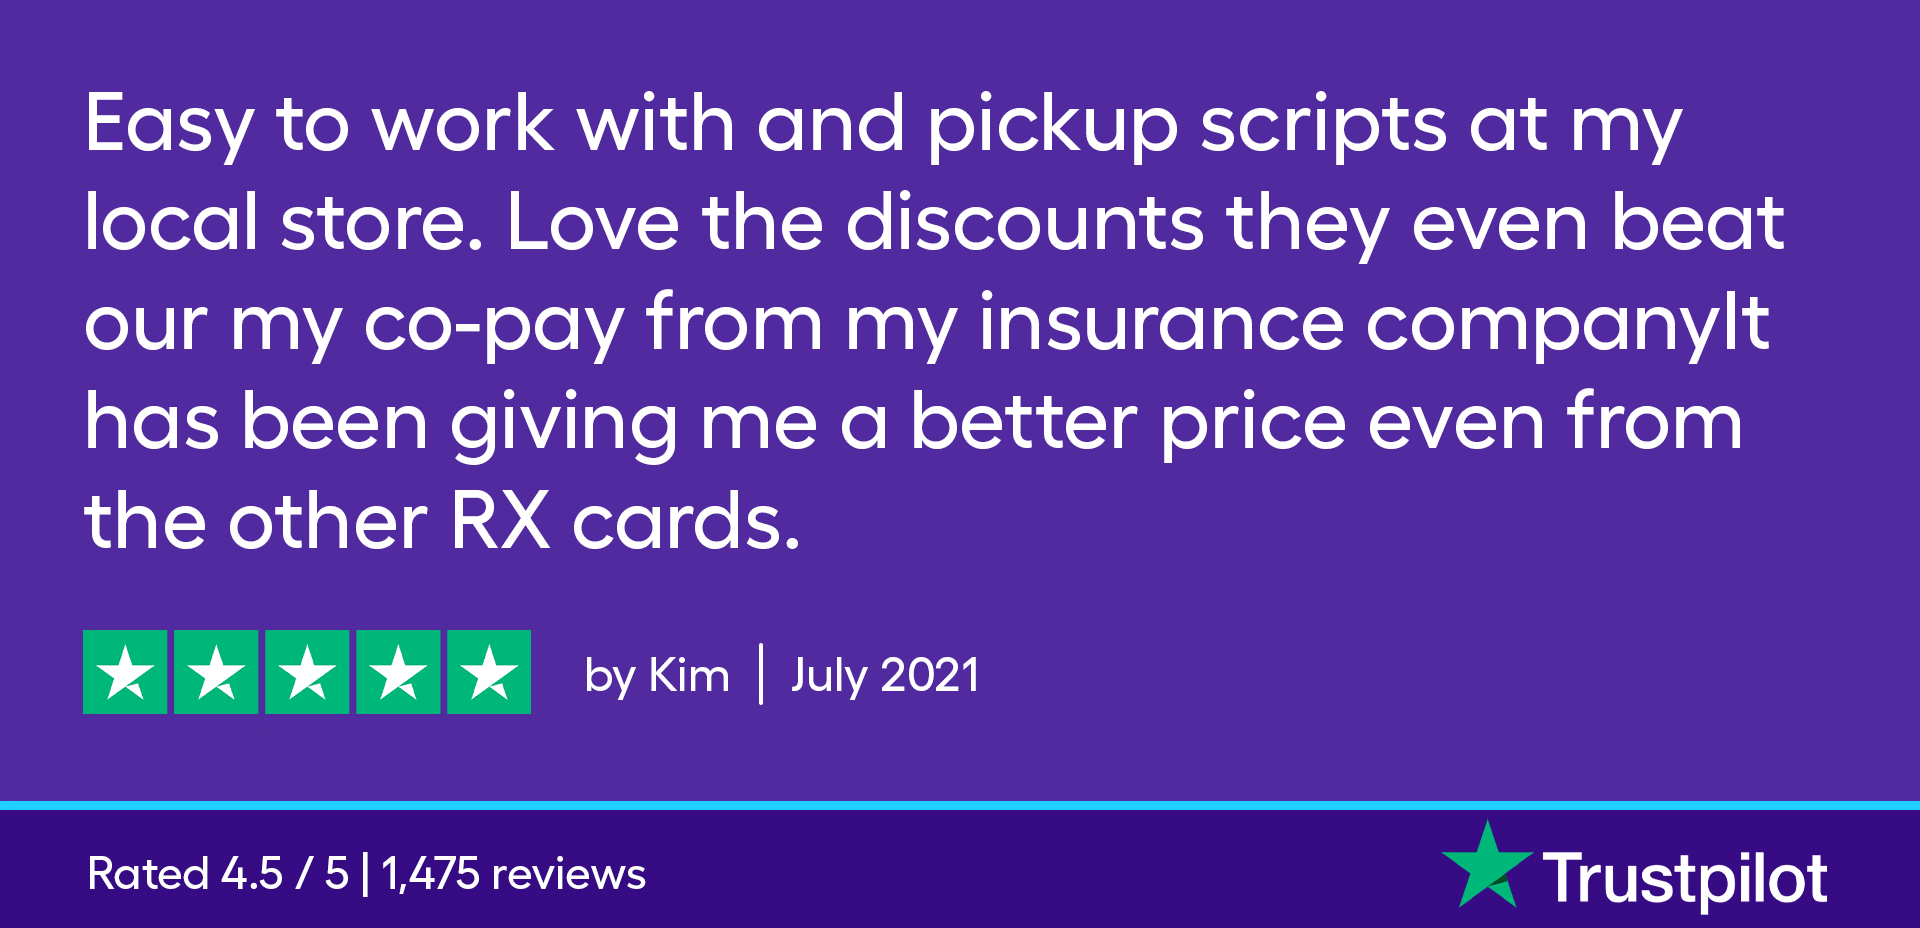 Easy to work with and pick up scripts at my local store. Nice to have the discounted rate automatically at the store. Love the discounts, they even beat out my copay from my insurance company. SingleCare has better prices than any other Rx discount card.